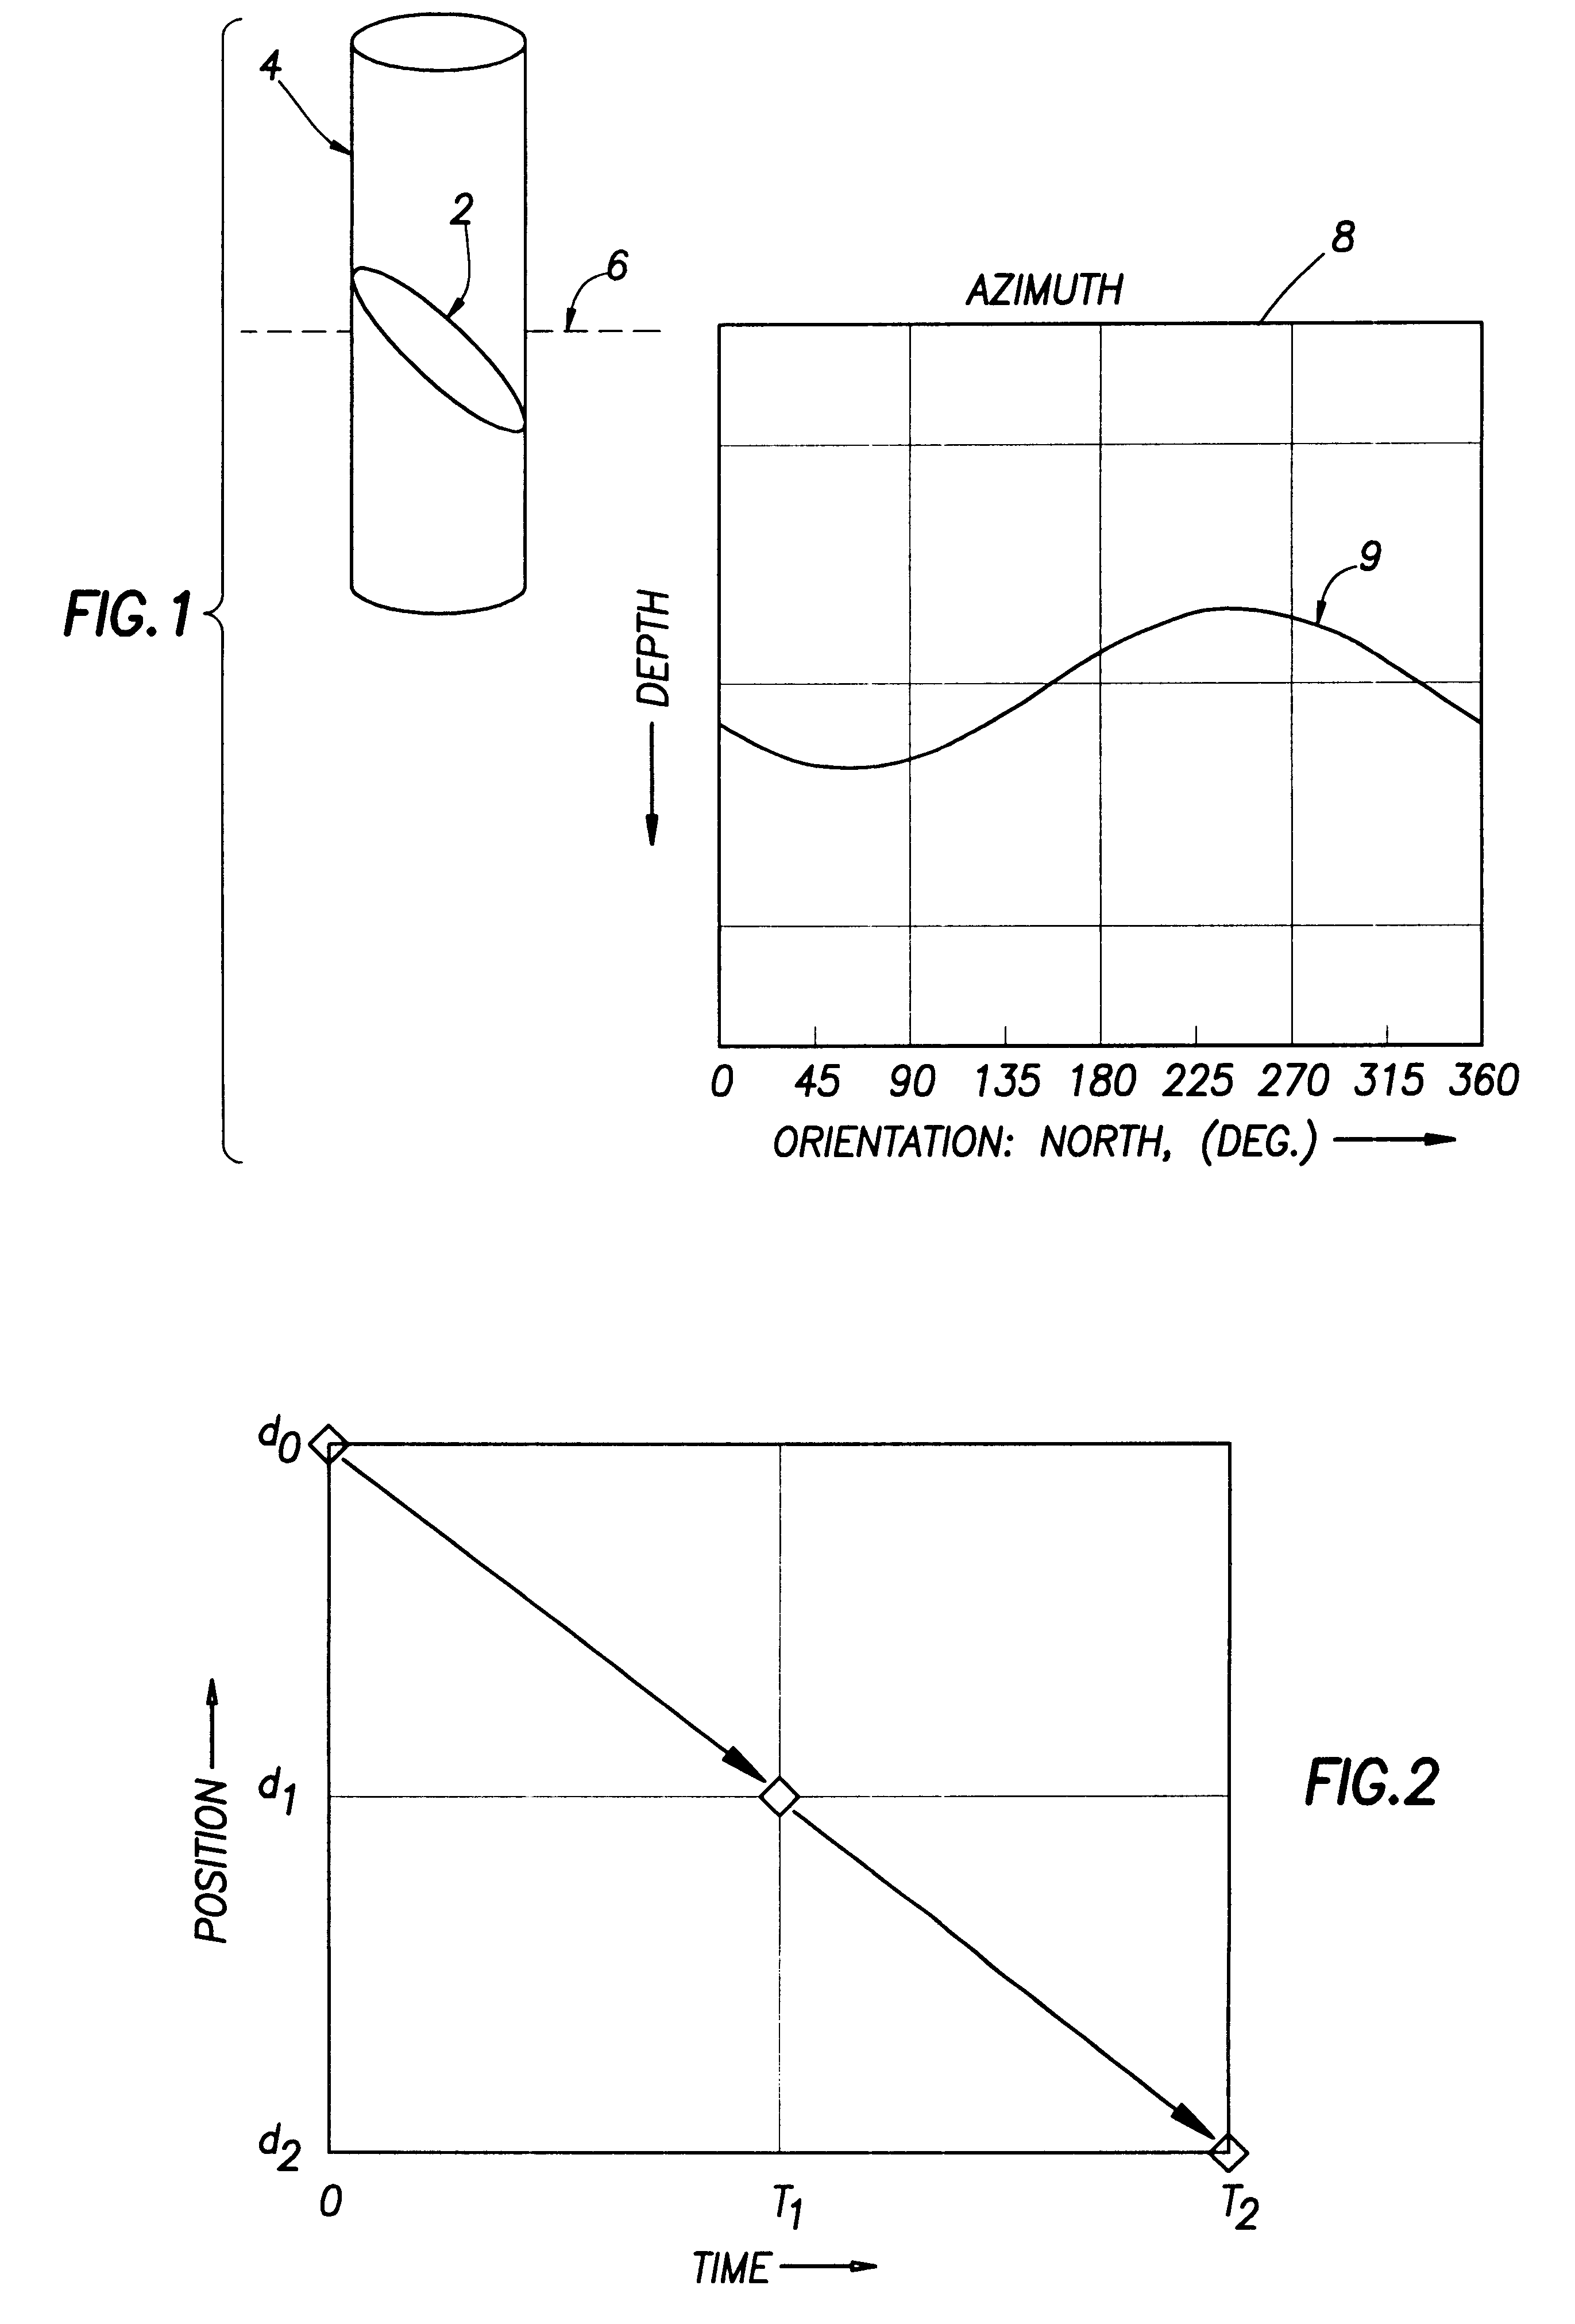 Method and apparatus using multi-target tracking to analyze borehole images and produce sets of tracks and dip data